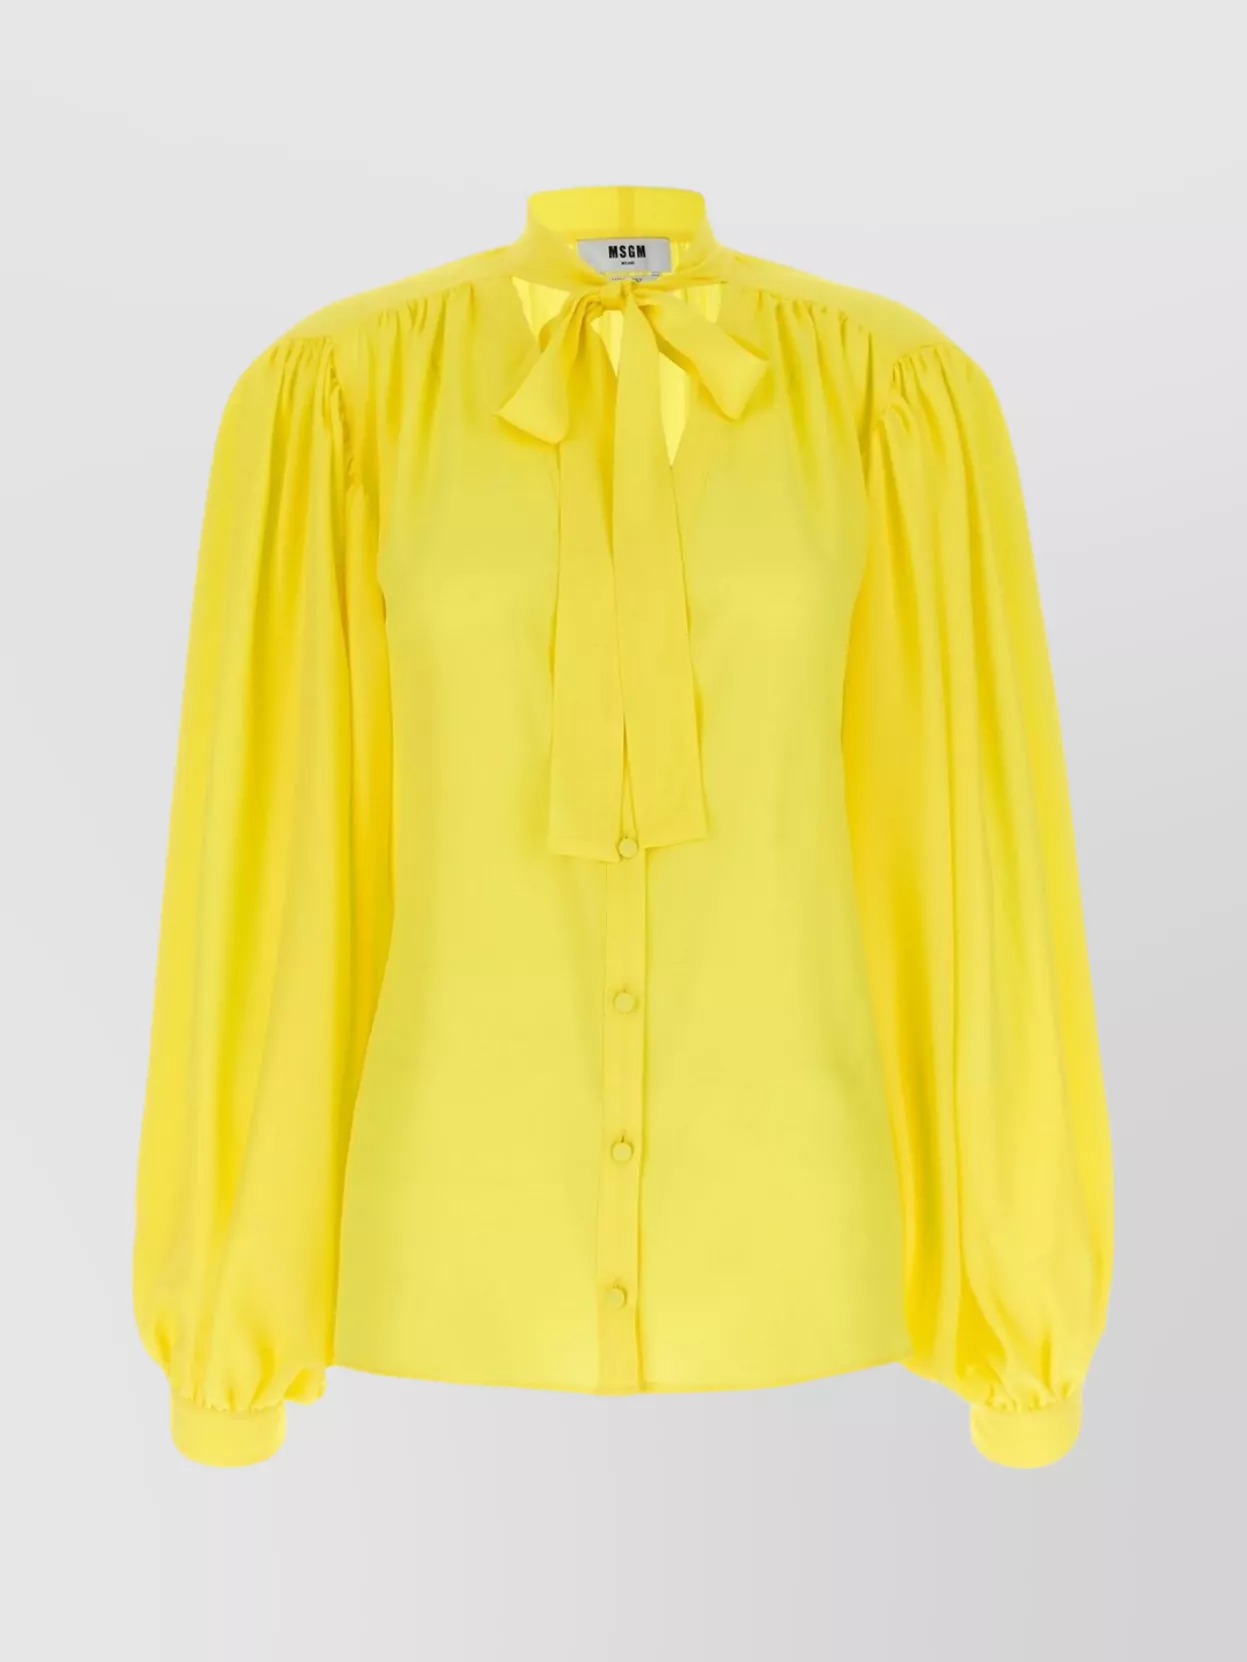 Msgm Bow Neck Shirt With Pleated Shoulders